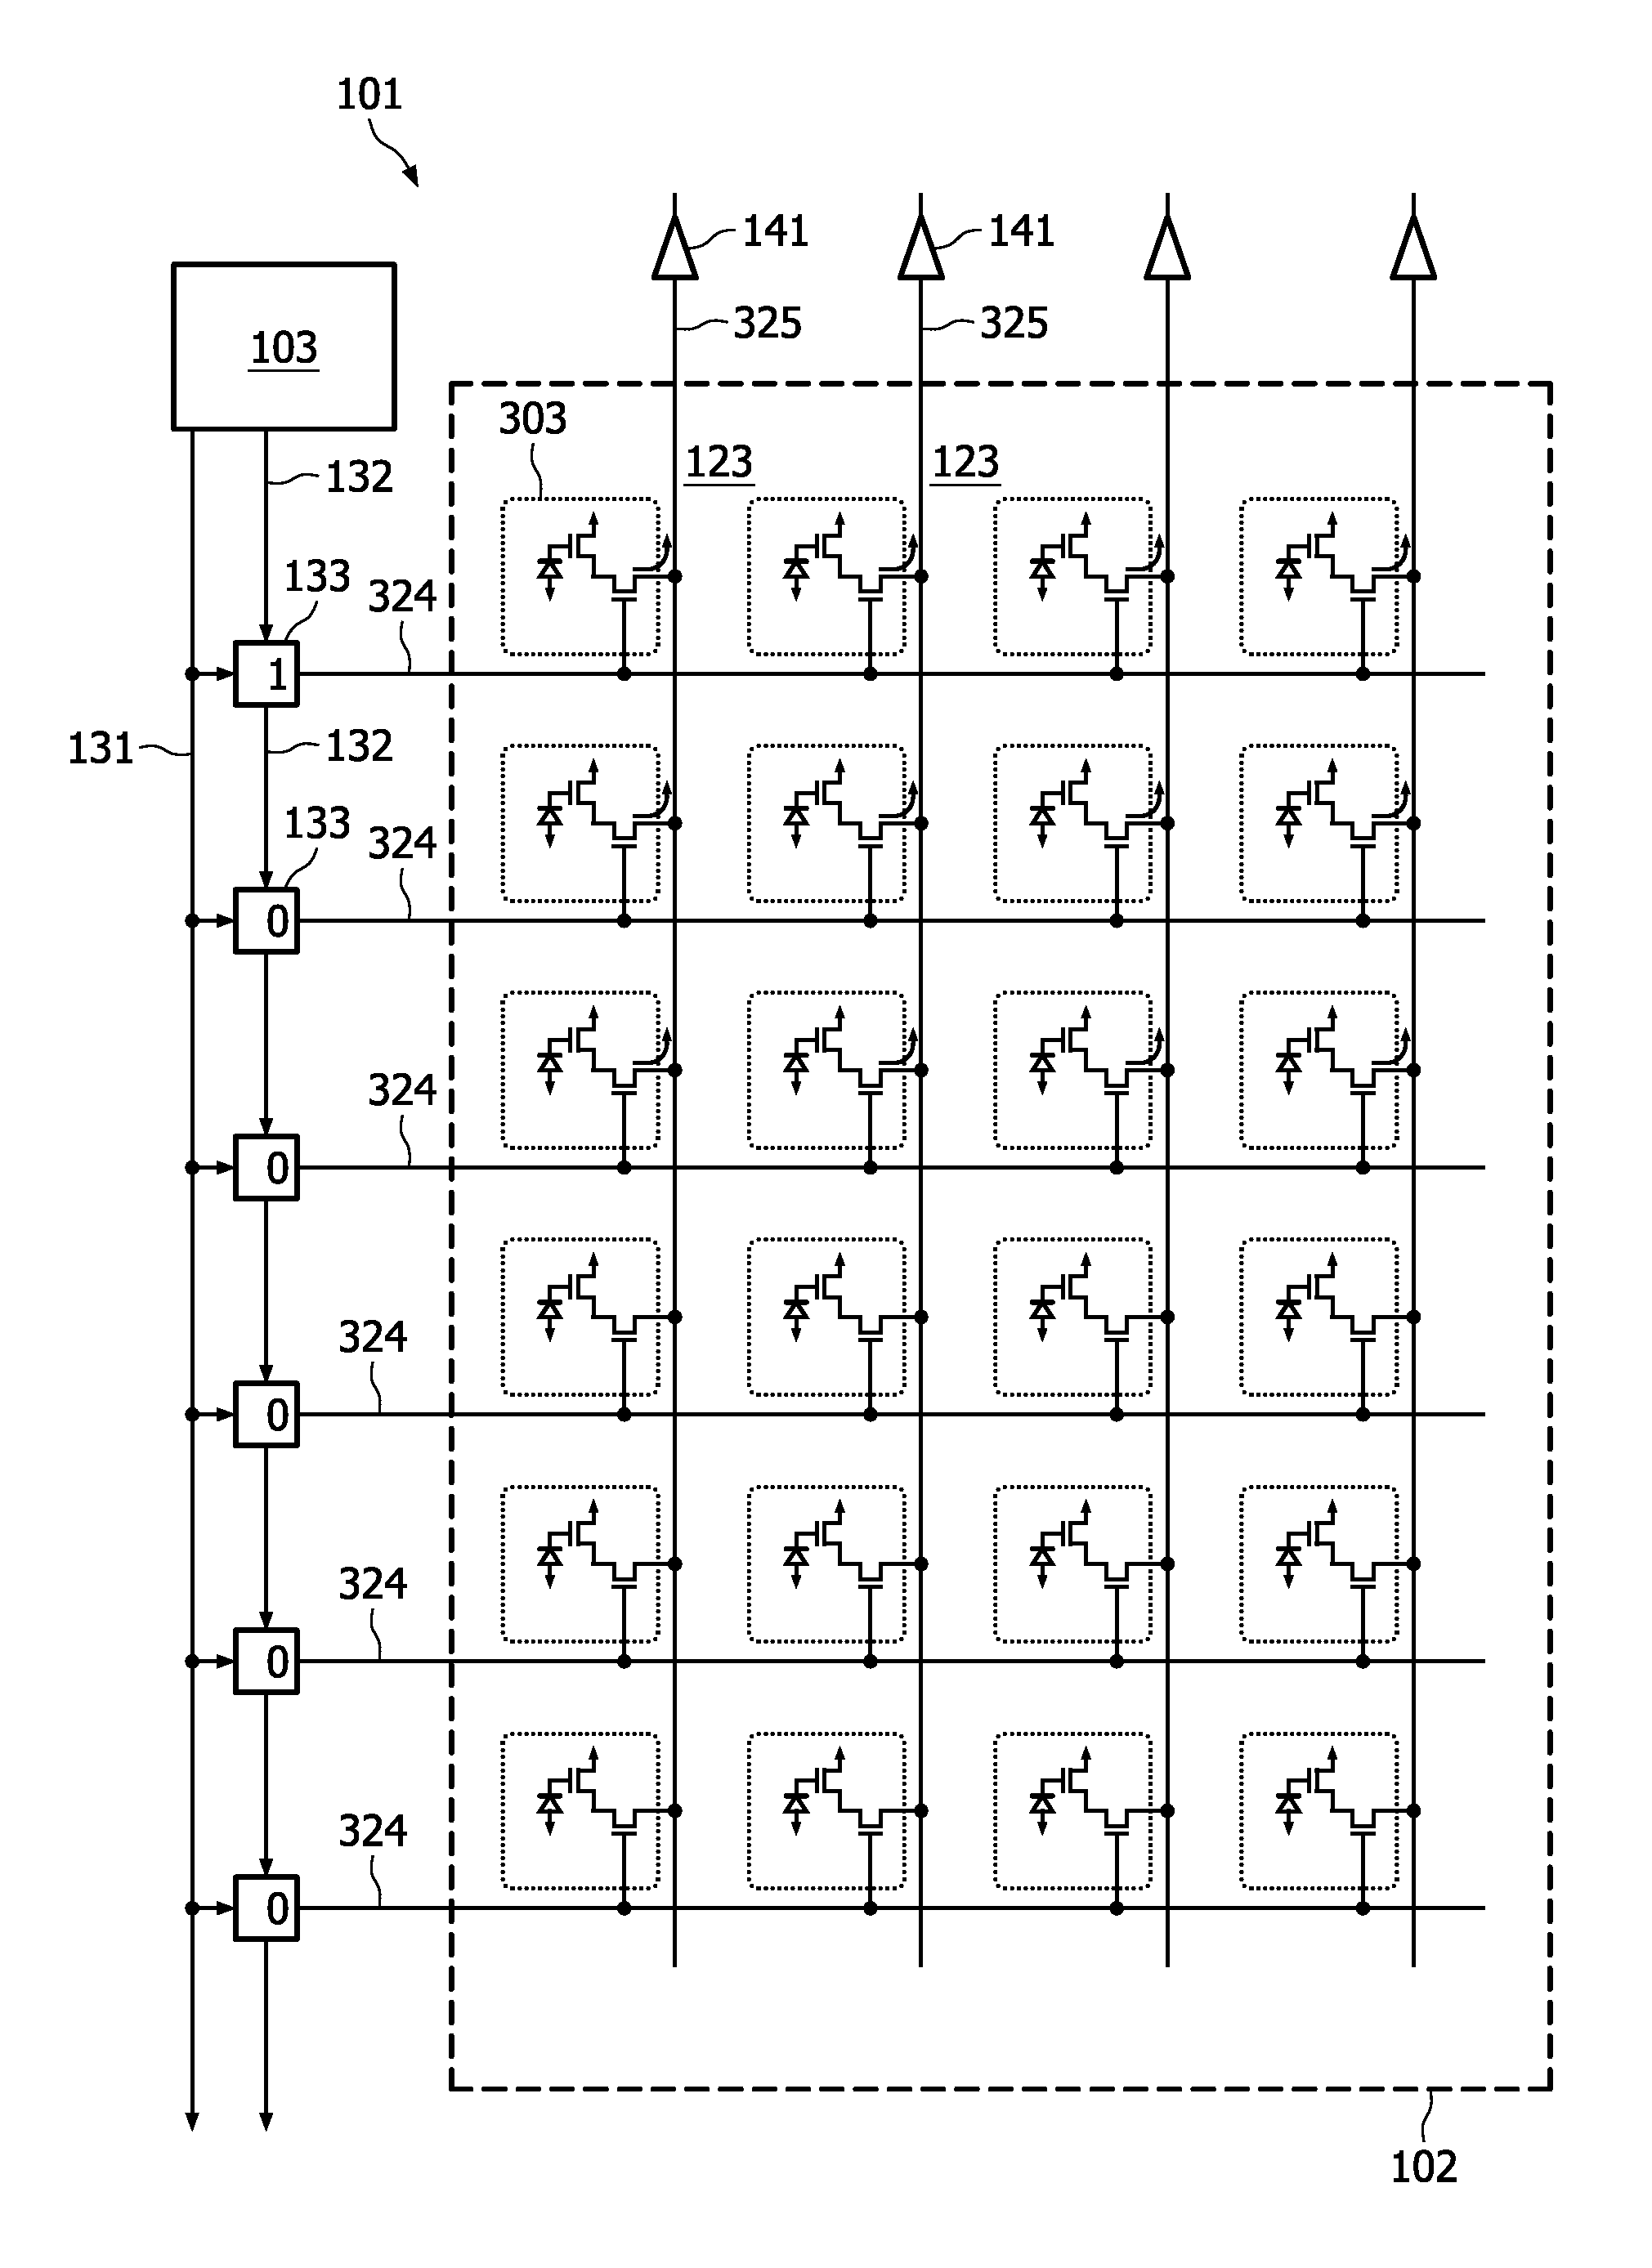 Suppression of direct detection events in X-ray detectors